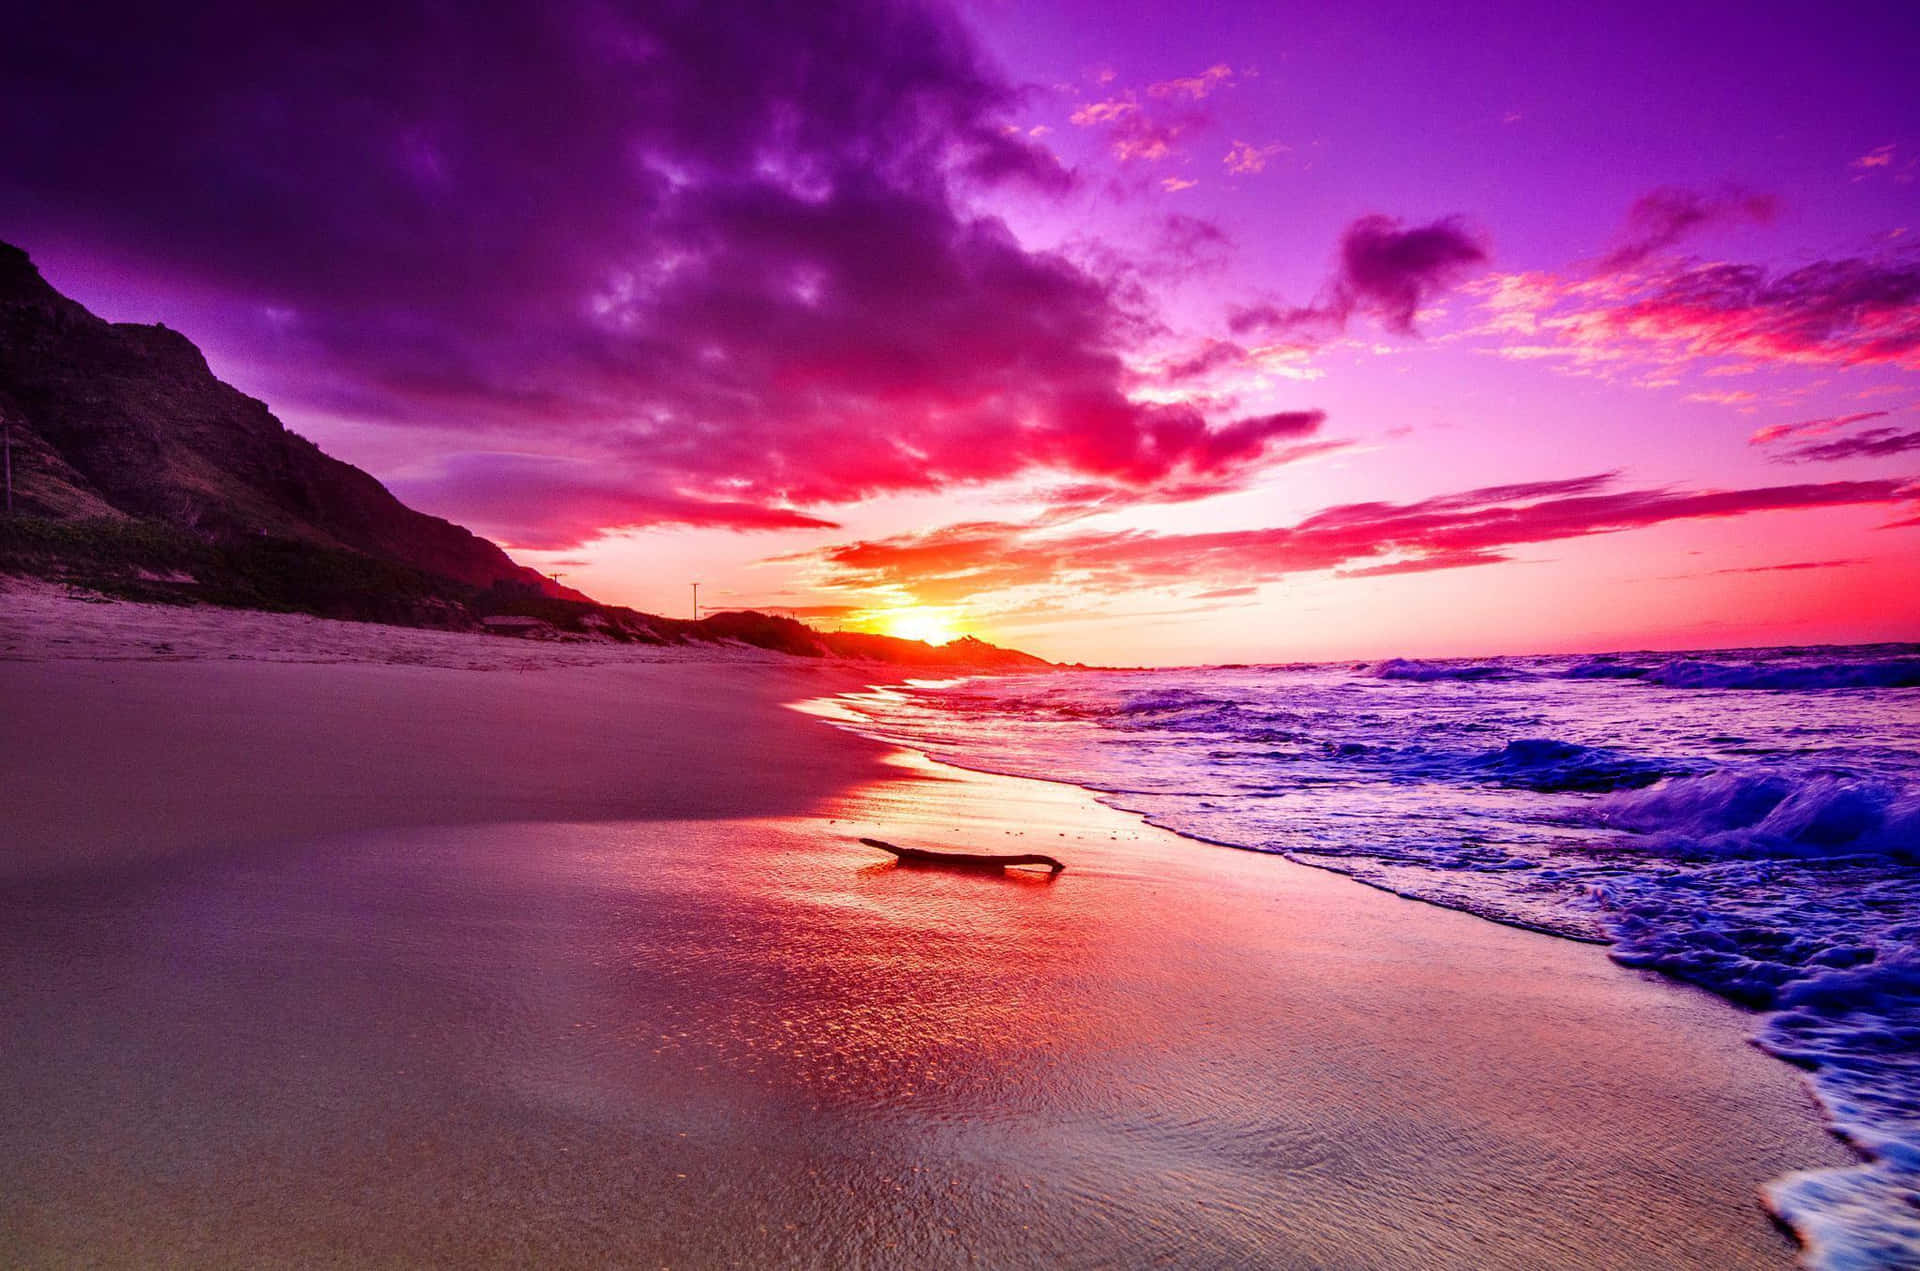 Captivating Colorful Sunset Wallpaper